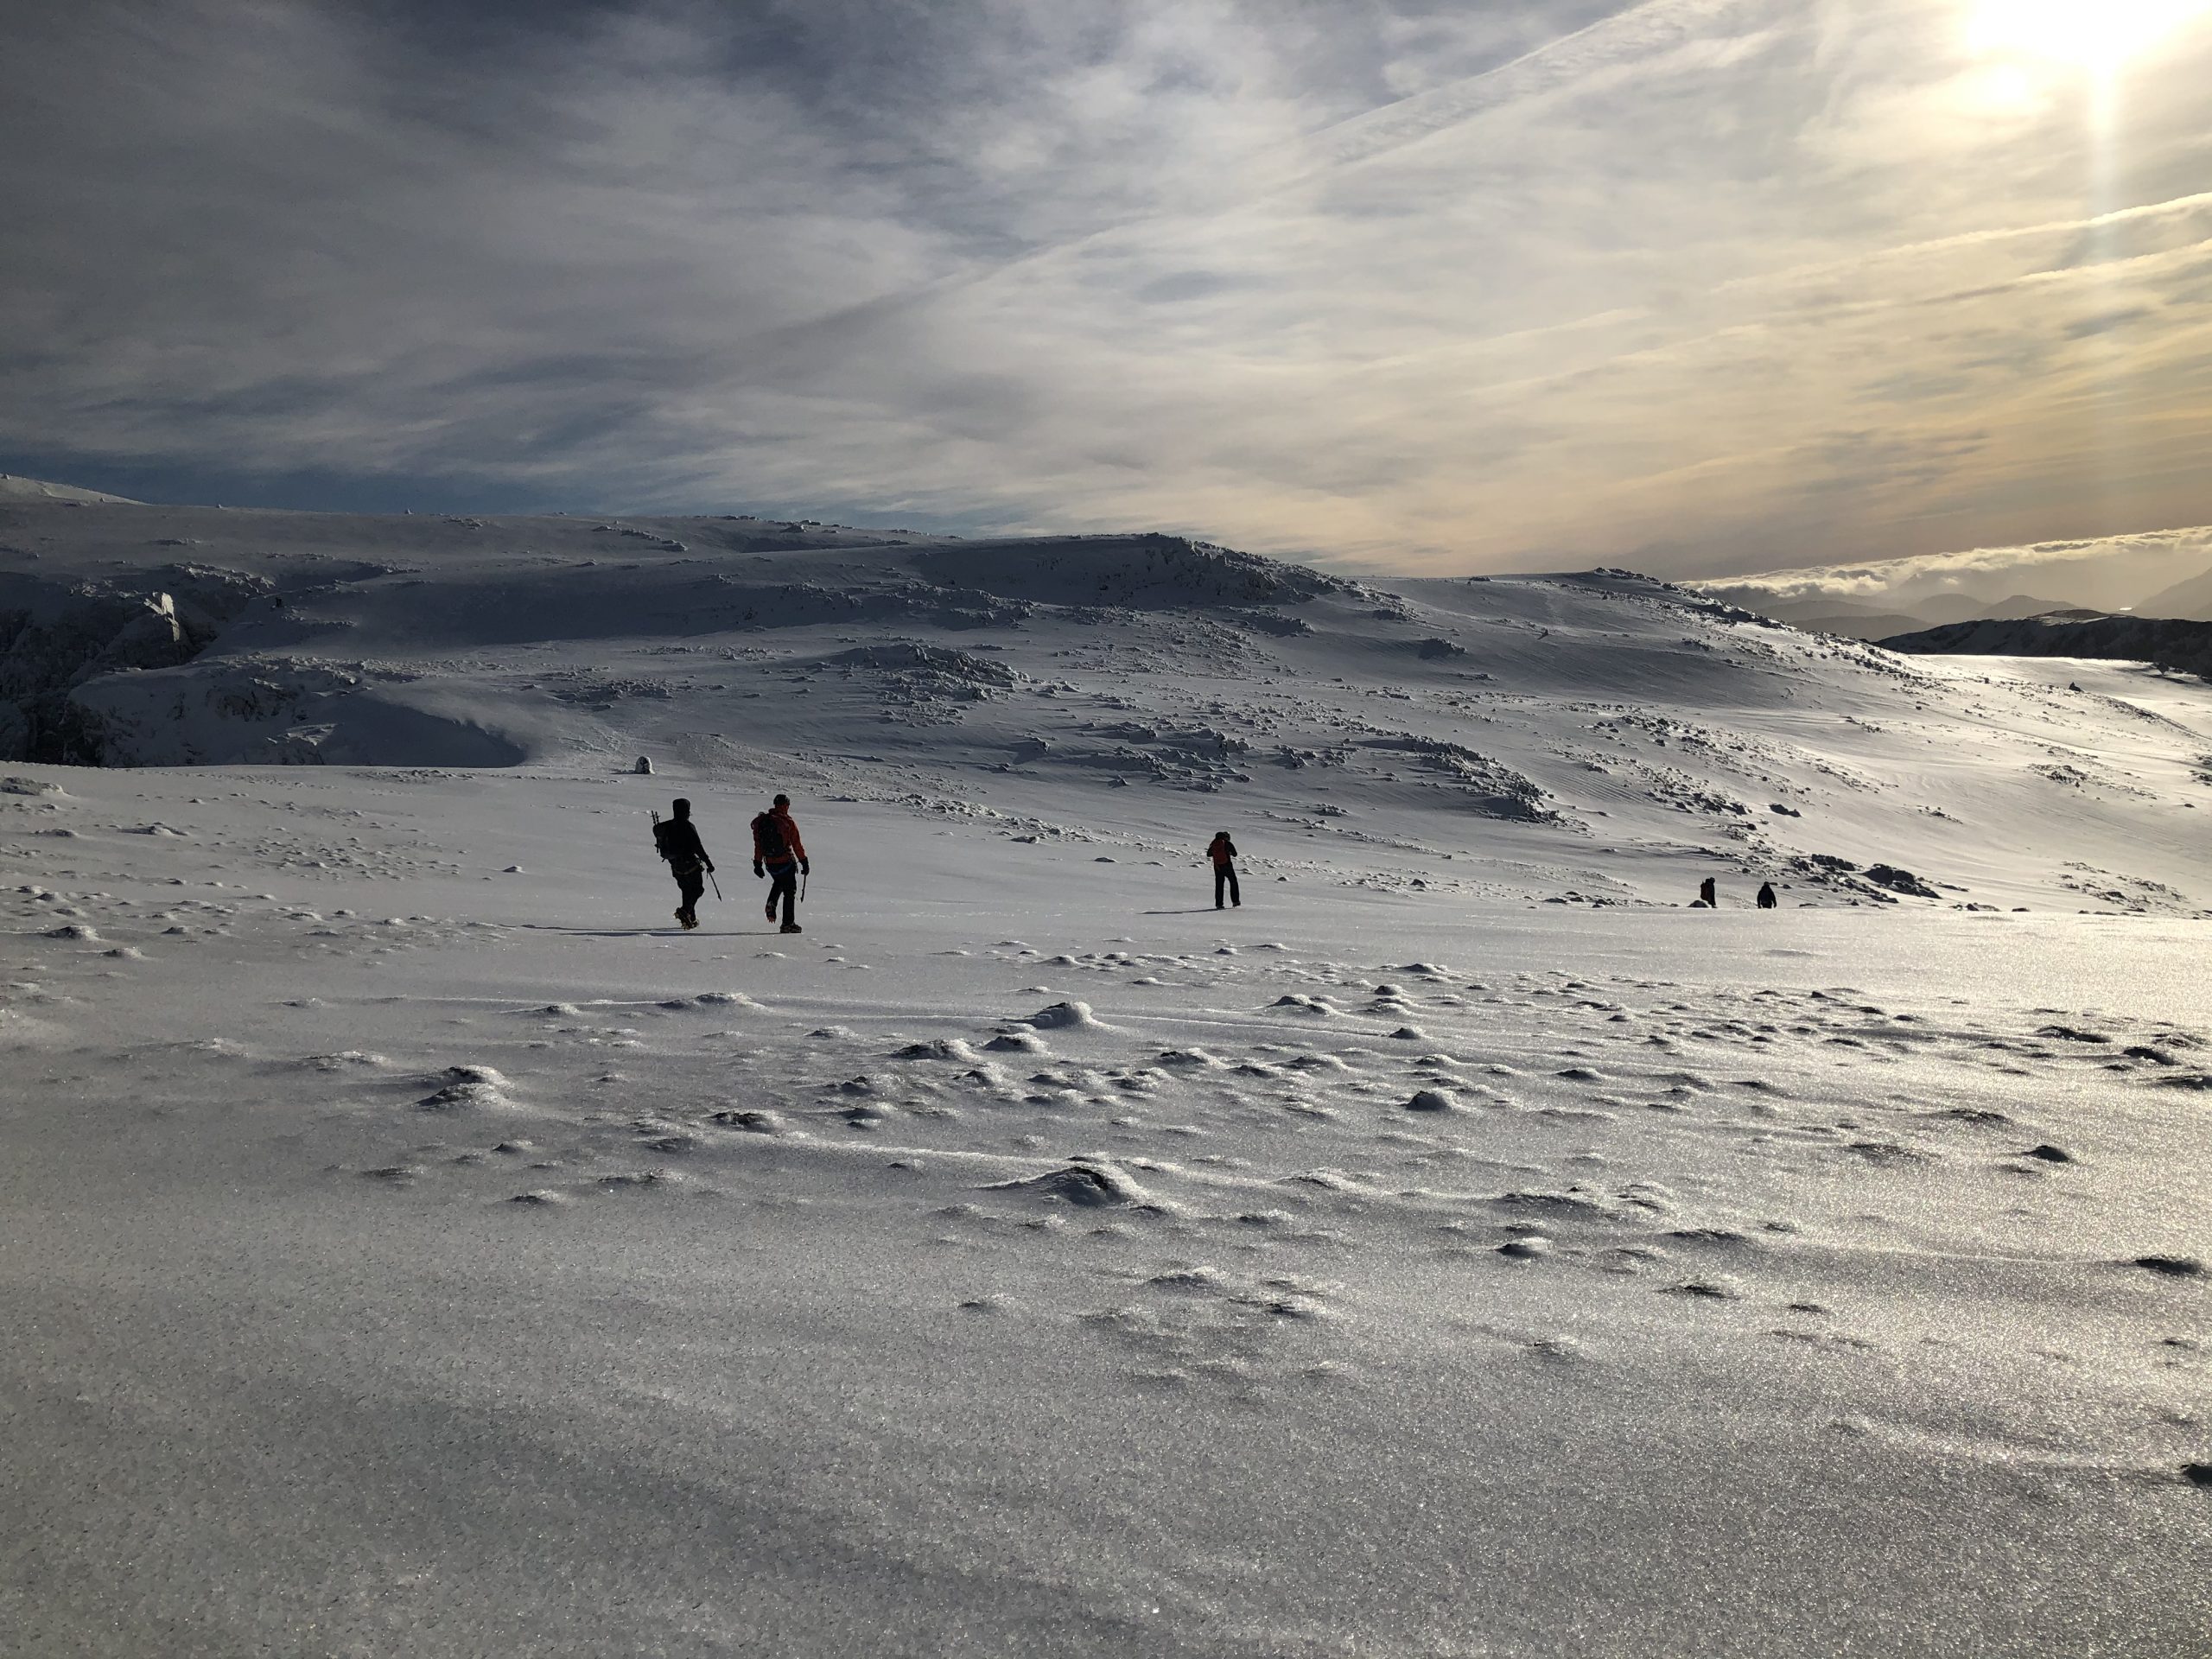 A group of mountaineers descending the summit plateau of Ben Nevis in winter, with the snow sparkling all around them